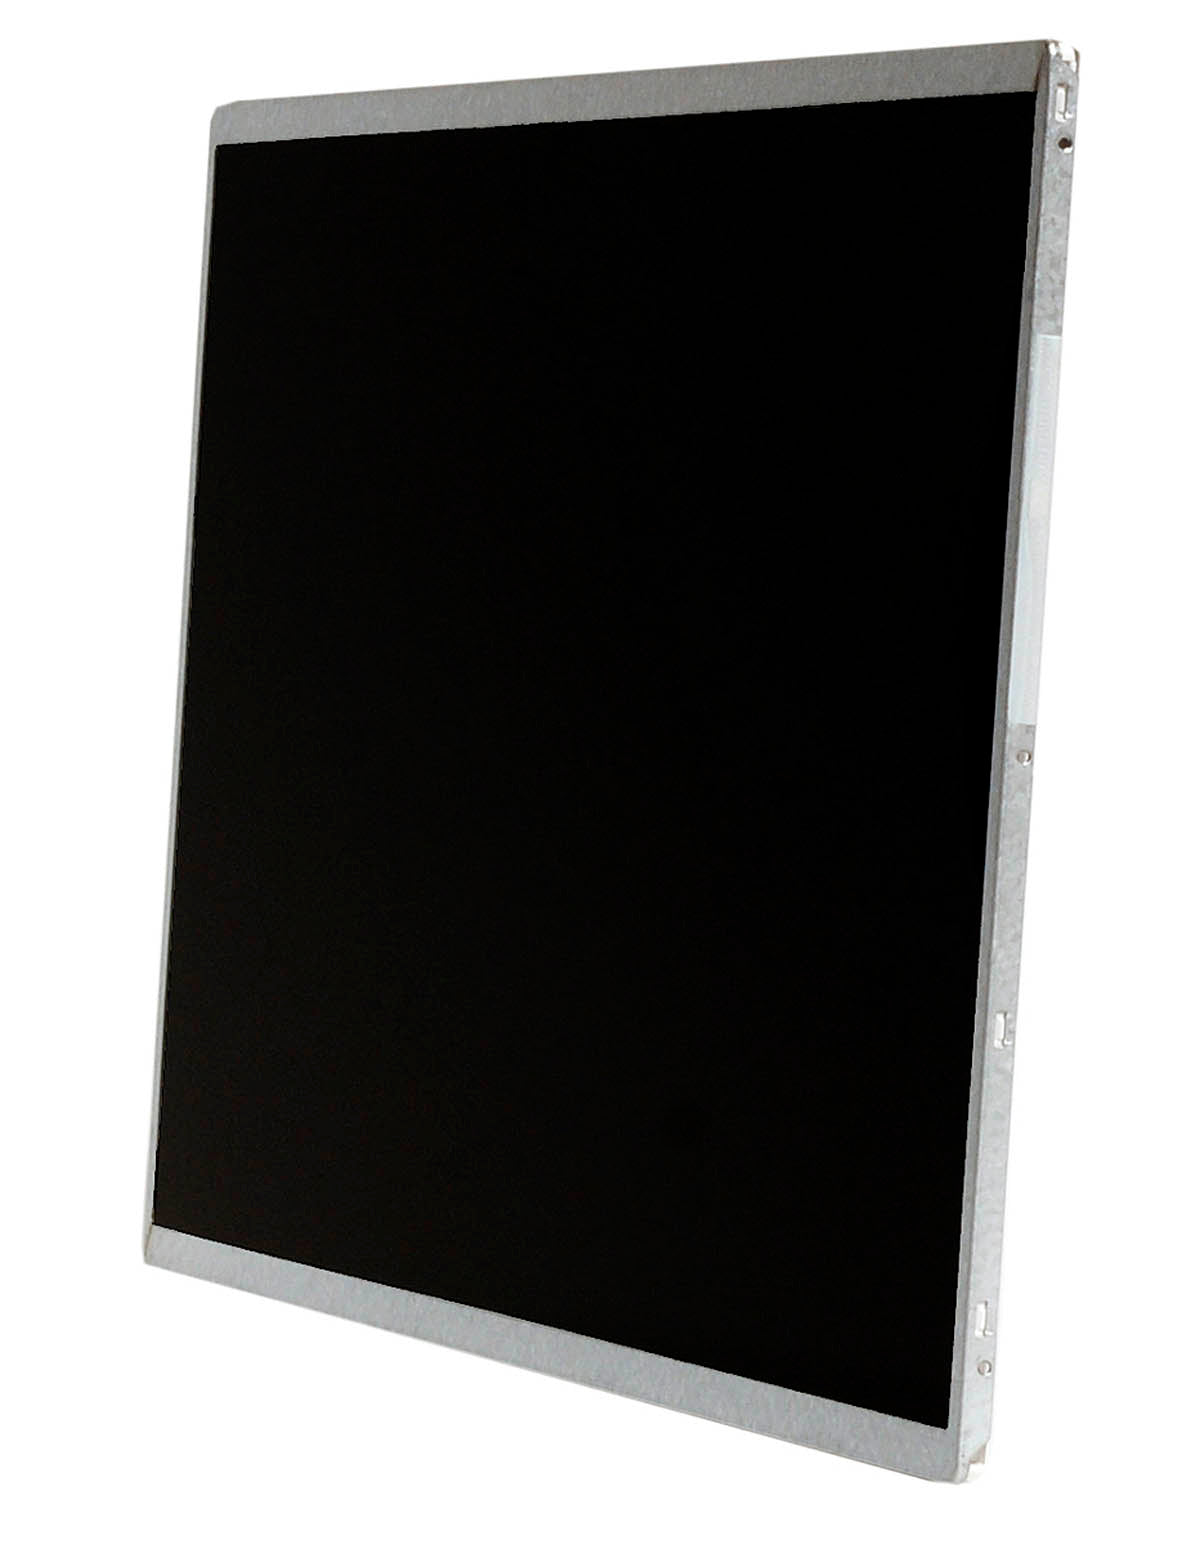 Replacement Screen For LTN140AT02-G01 HD 1366x768 Glossy LCD LED Display